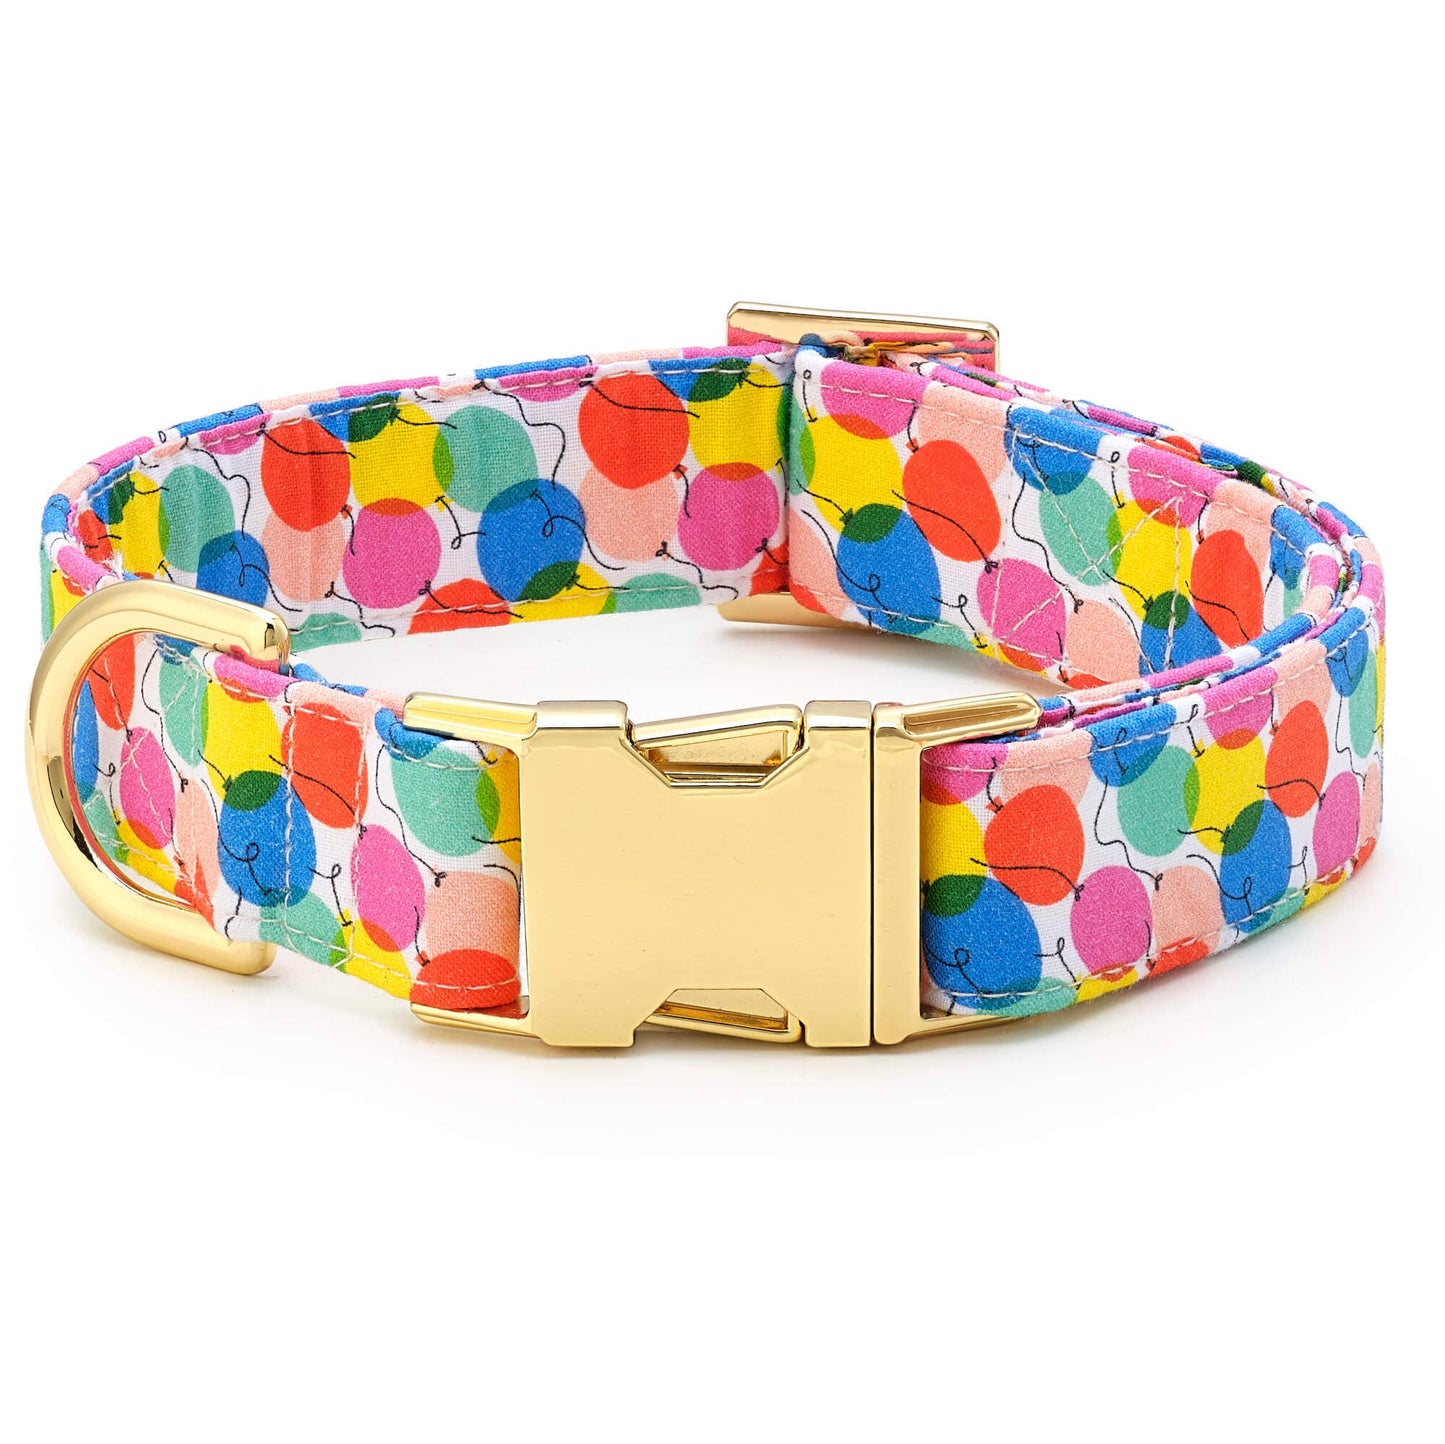 Pup, Pup, and Away Birthday Dog Collar: L/ Gold